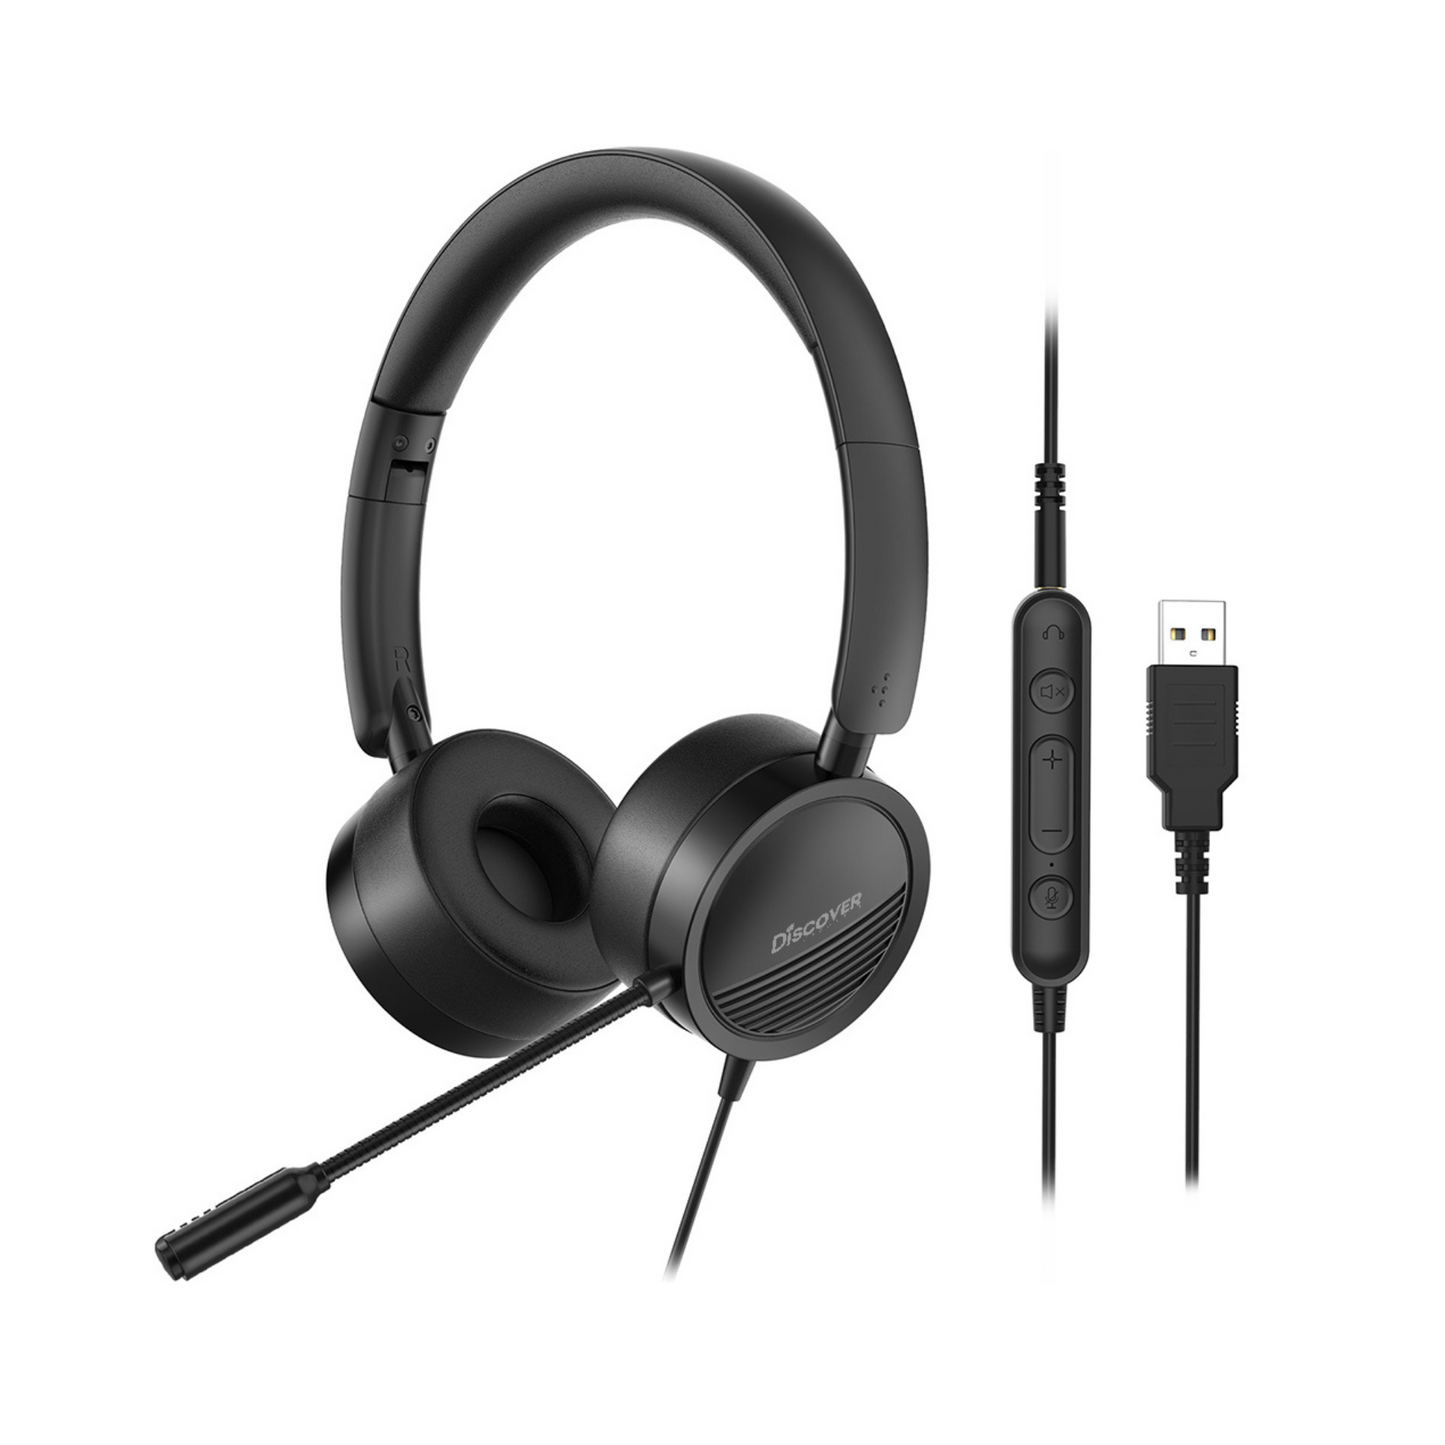 Discover D312U USB Wired Headset